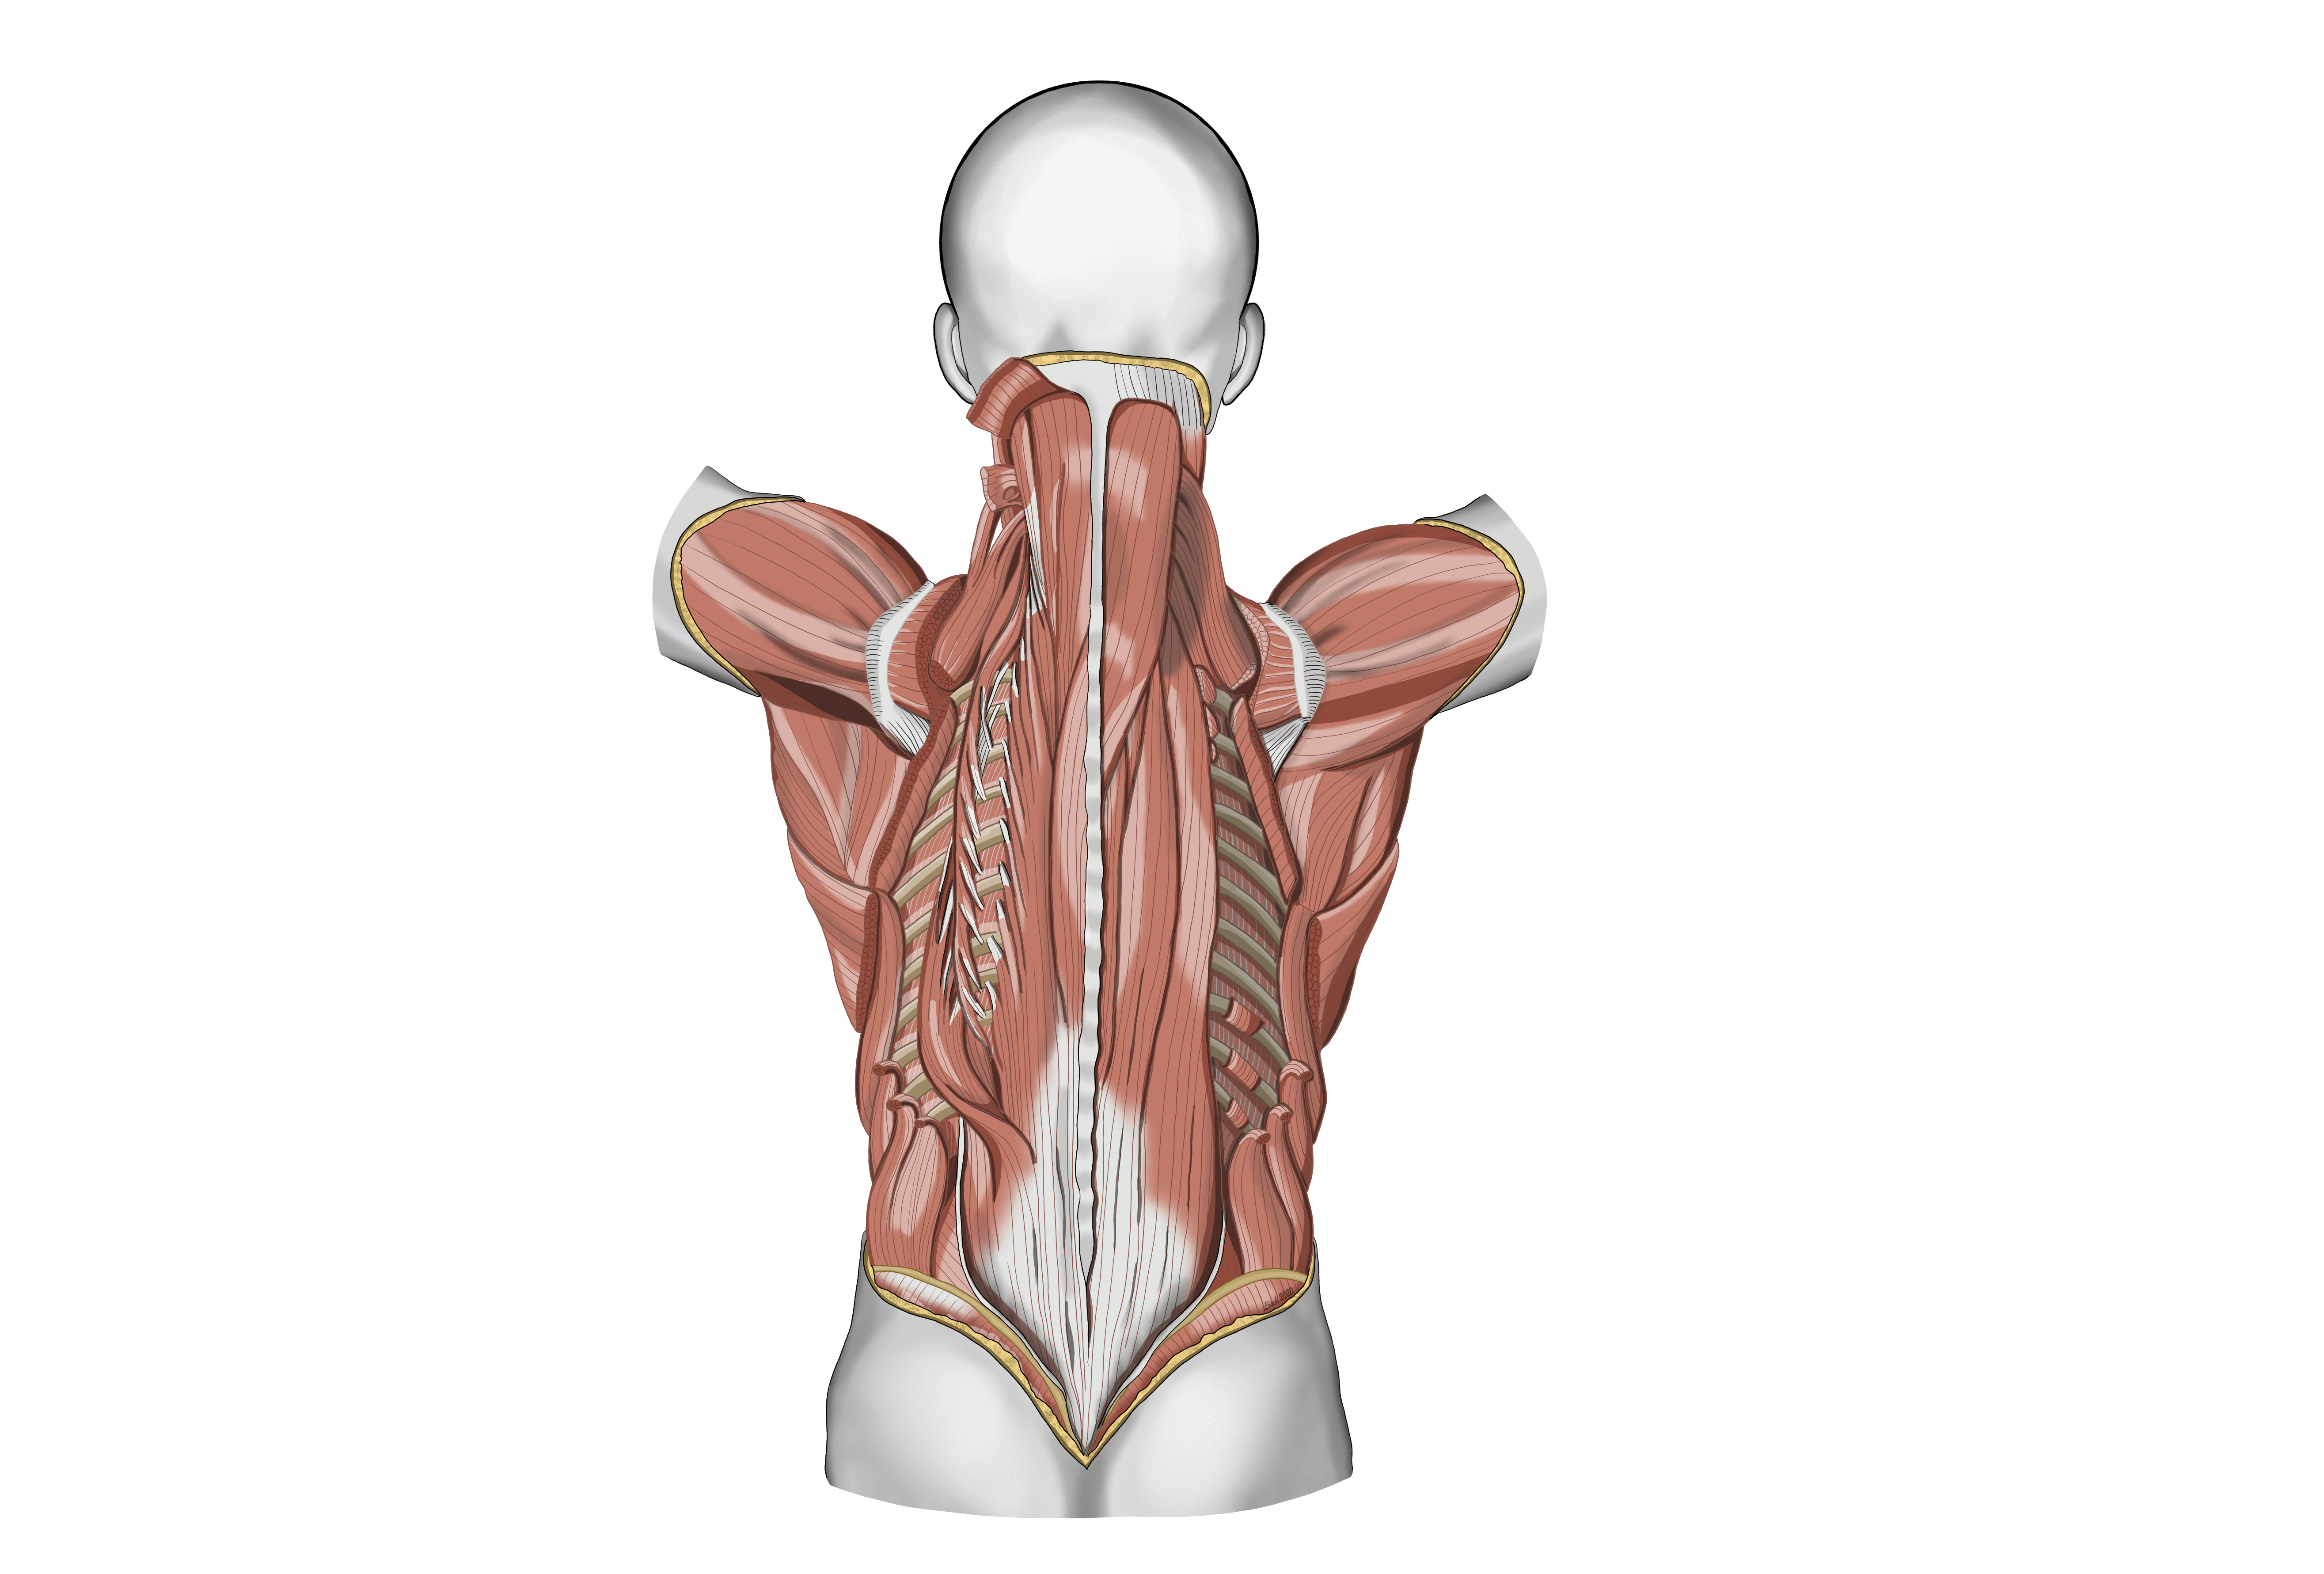 Paraspinal Muscles: Anatomy and Function